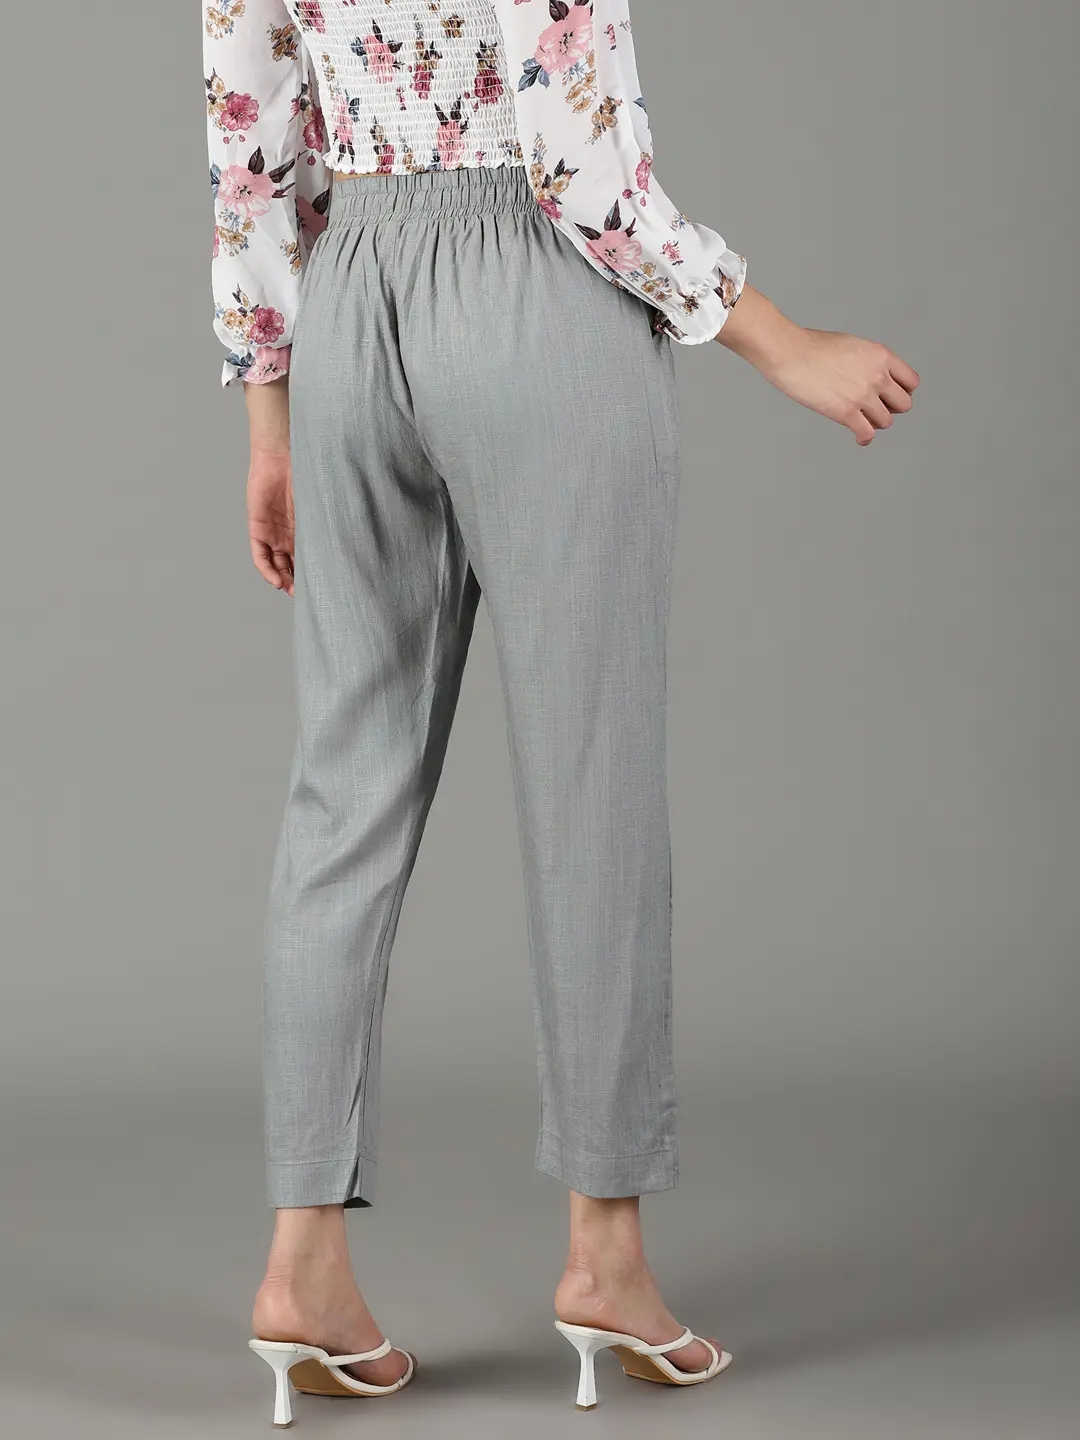 Grey White Striped Pants for Women Grey White Striped Cotton Pants for  Ladies in Jaipur